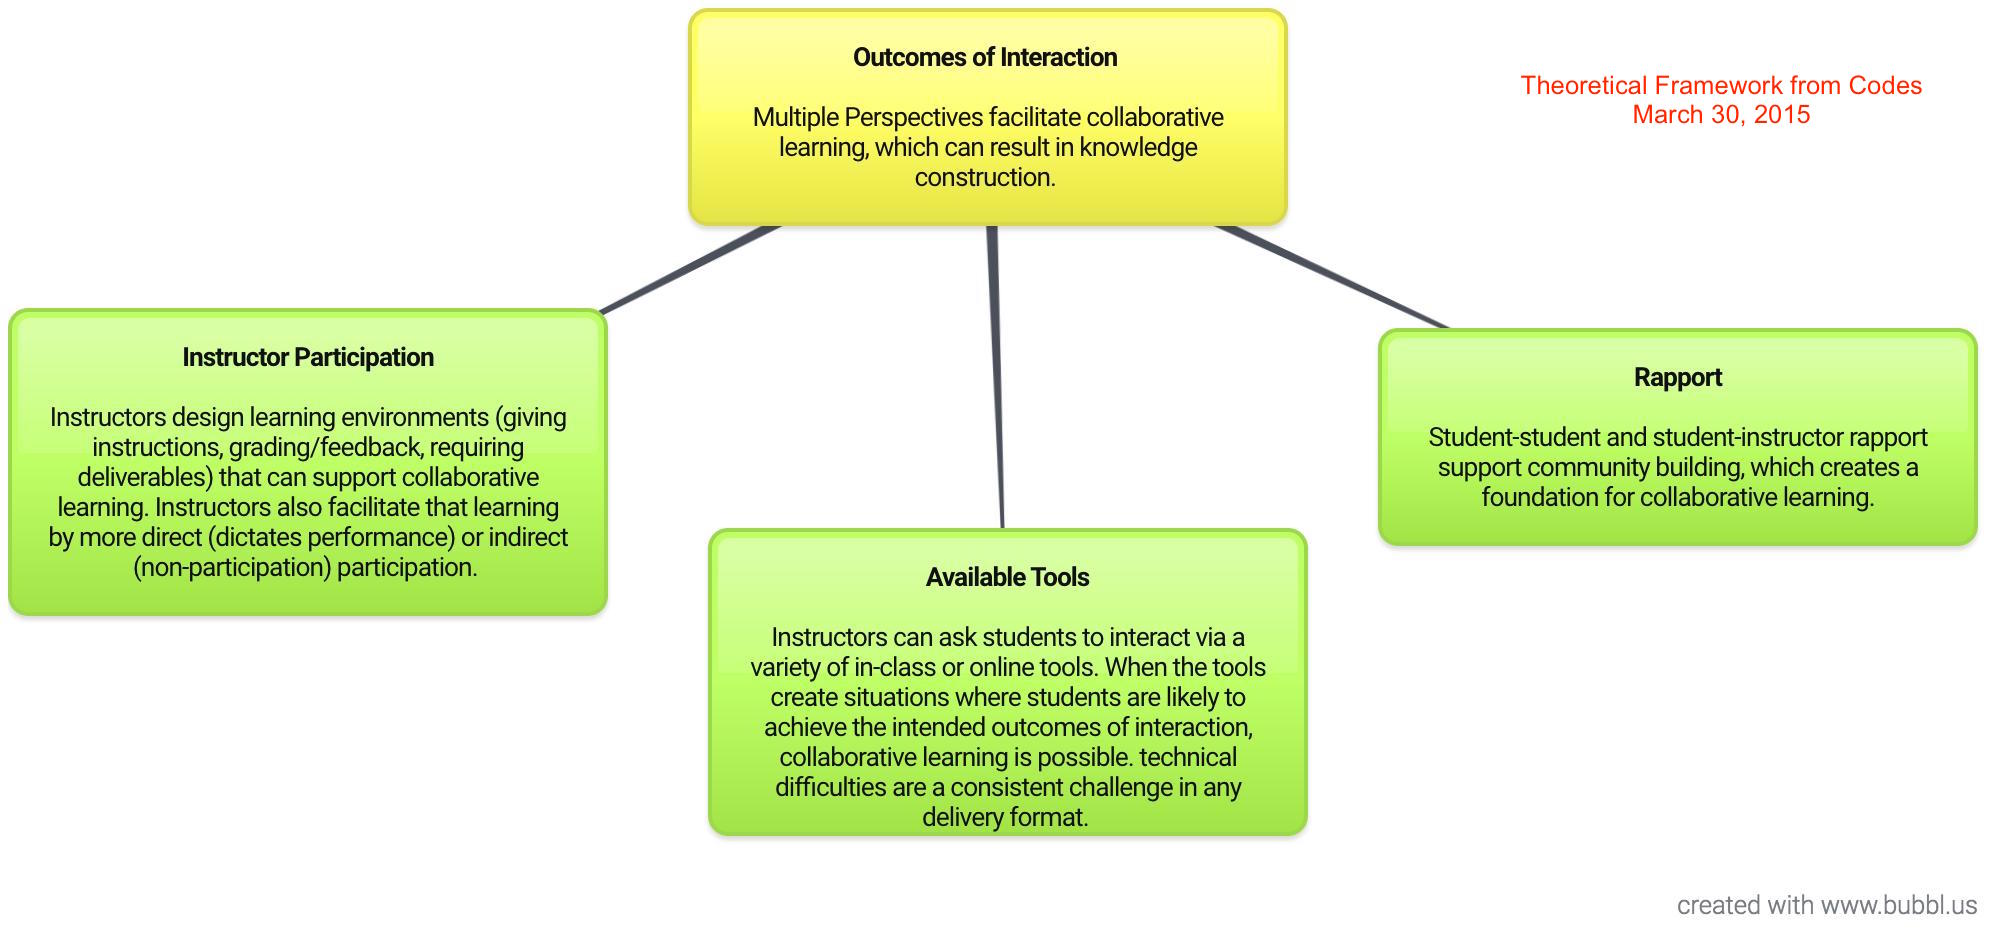 Figure three contains four boxes, 'outcomes of interaction' is visualized as the primary category with three sub-categories: Instructor Participation, Rapport, and Available Tools. Each box also includes a description. Outcomes of Interaction is described as: Multiple Perspectives facilitate collaborative learning, which can result in knowledge construction. Instructor Participation is described as: Instructors design learning environments (giving instructions, grading/feedback, requiring deliverables) that can support collaborative learning. Instructors also facilitate that learning by more direct (dictates performance) and indirect (non-participation) participation. Rapport is described as: student-student and student-instructor rapport support community building, which creates a foundation for collaborative learning. Available Tools is described as: Instructors can ask students to interact via a variety of in-class or online tools. When the tools create situations where students are likely to achieve the intended outcomes of interaction, collaborative learning is possible. Technical difficulties are a consistent challenge in any delivery format.